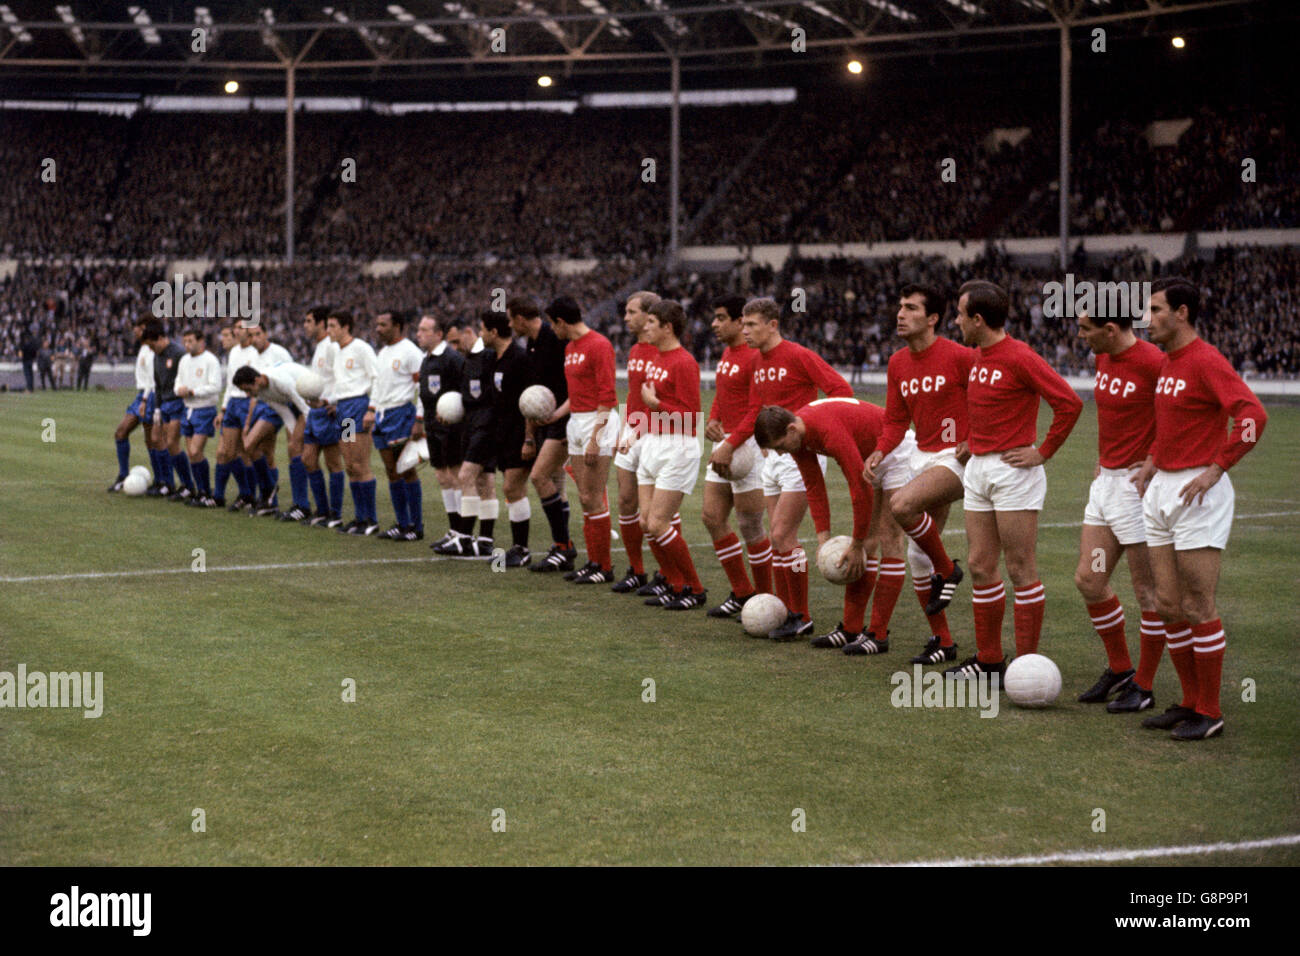 soccer-world-cup-england-66-third-place-play-off-portugal-v-ussr-wembley-G8P9P1.jpg